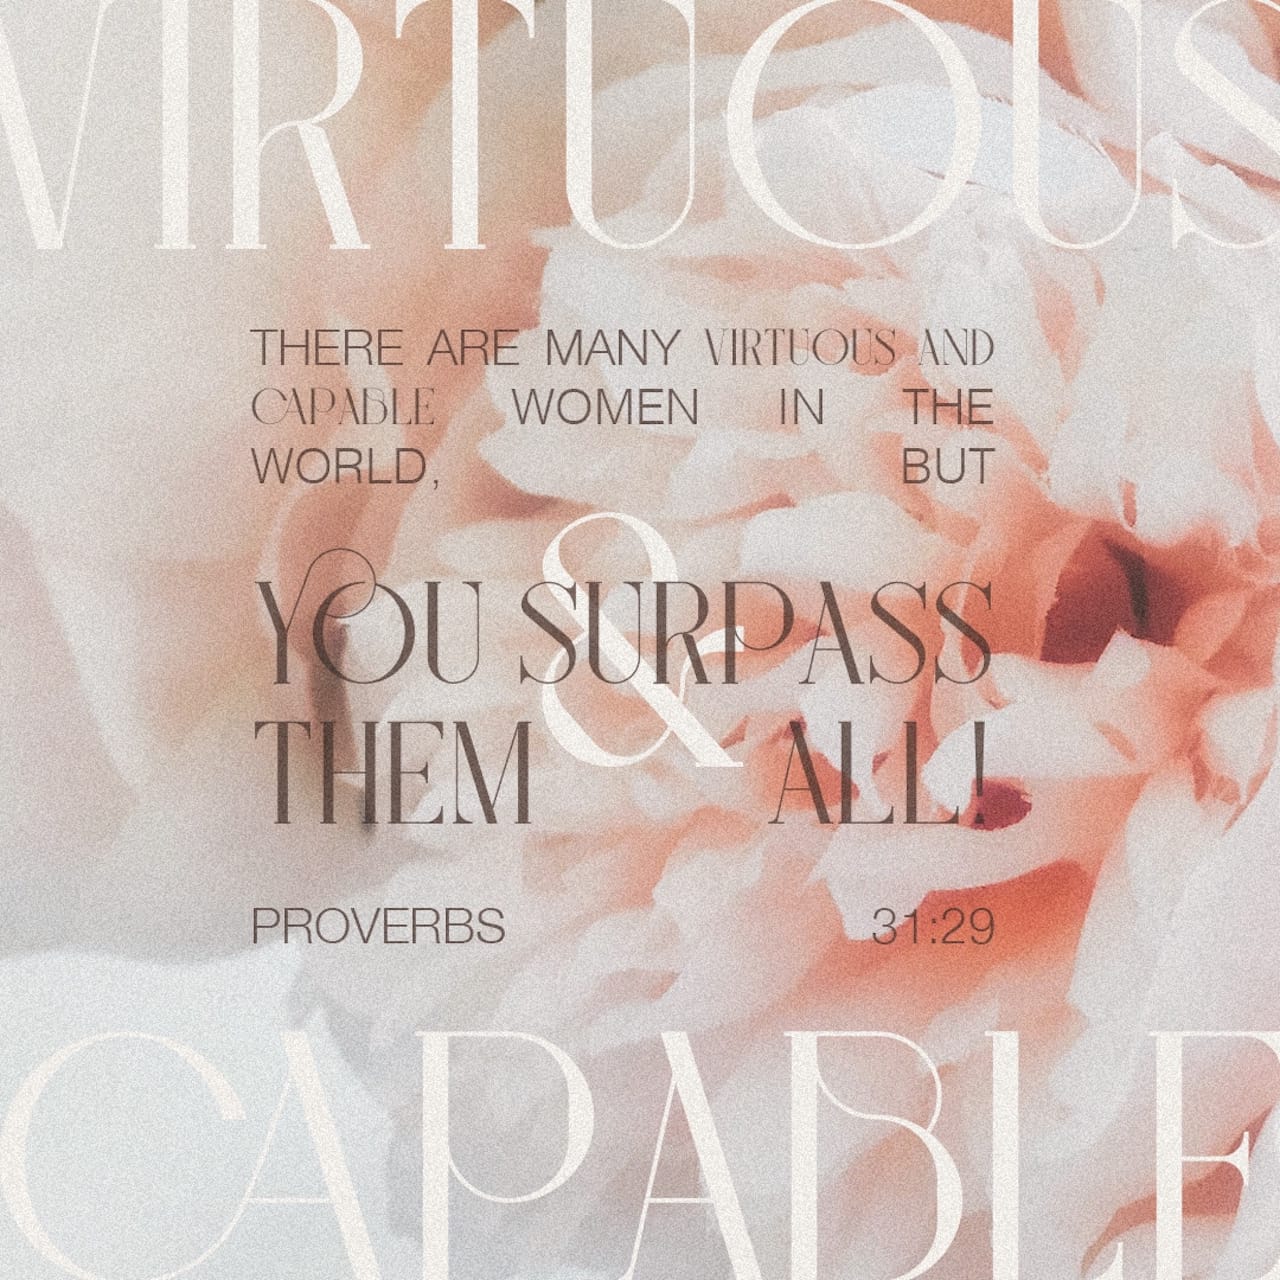 There are many virtuous and capable women in the world, but you surpass them all! - Proverbs 31:29 - Verse Image